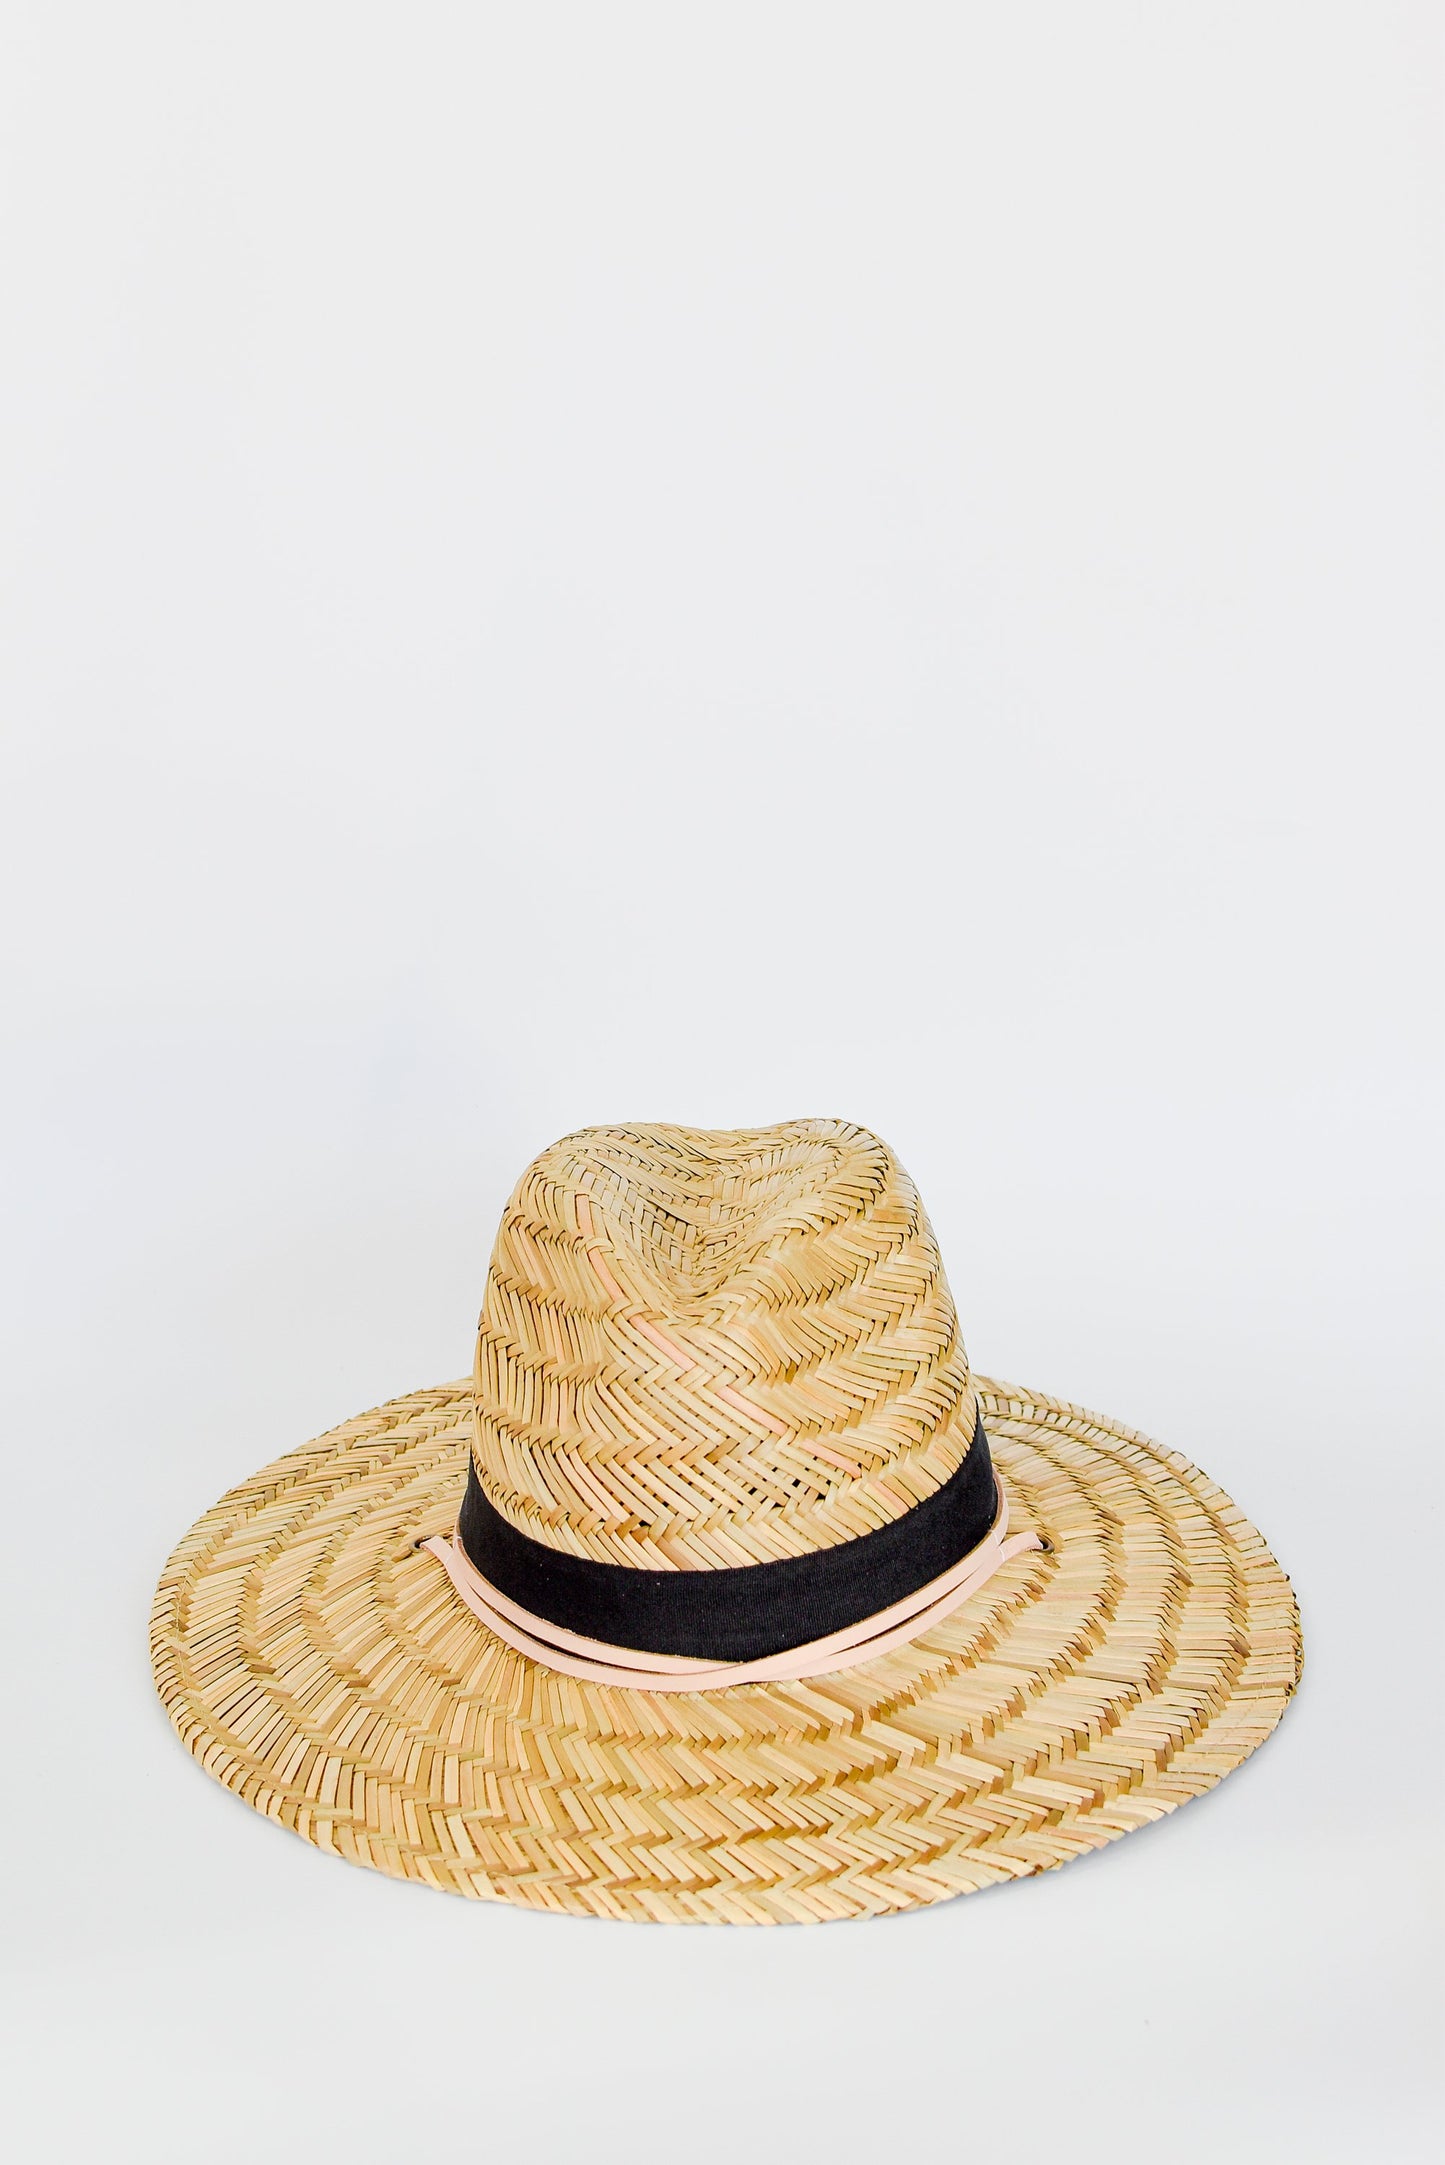 Straw lifeguard hat with tan leather chin strap and black band detail.